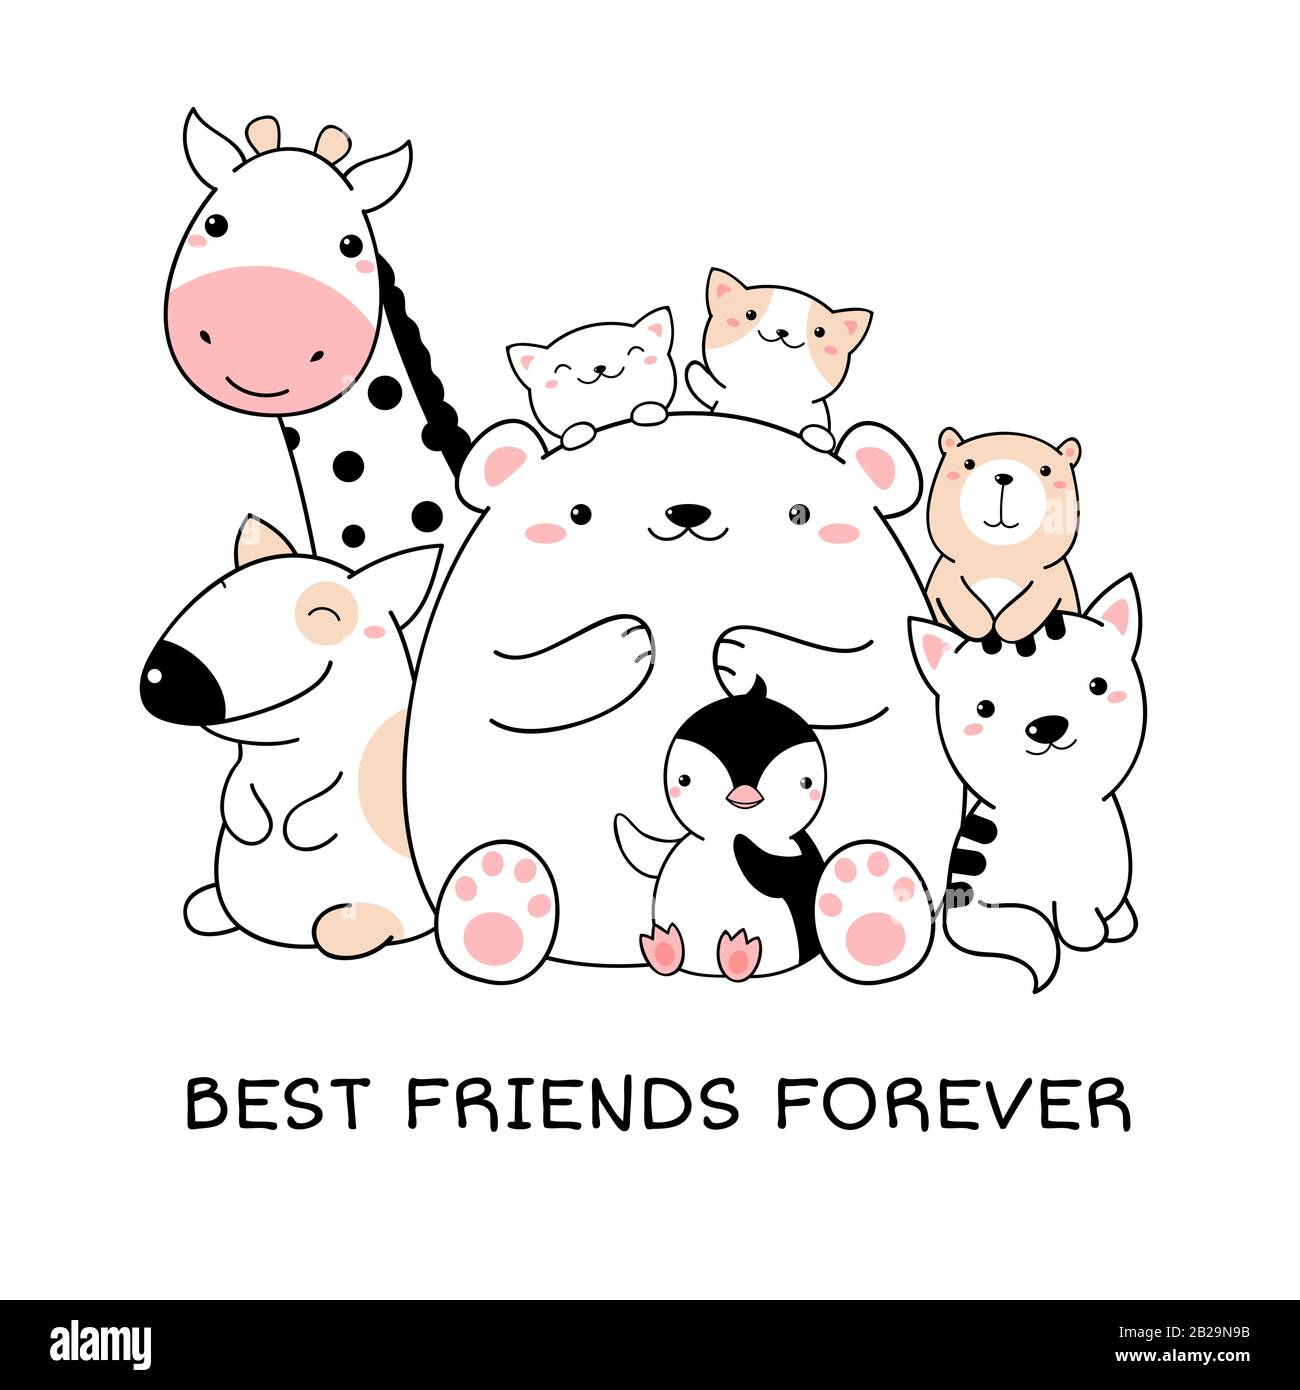 Best friends forever. Group of cute animals in kawaii style ...